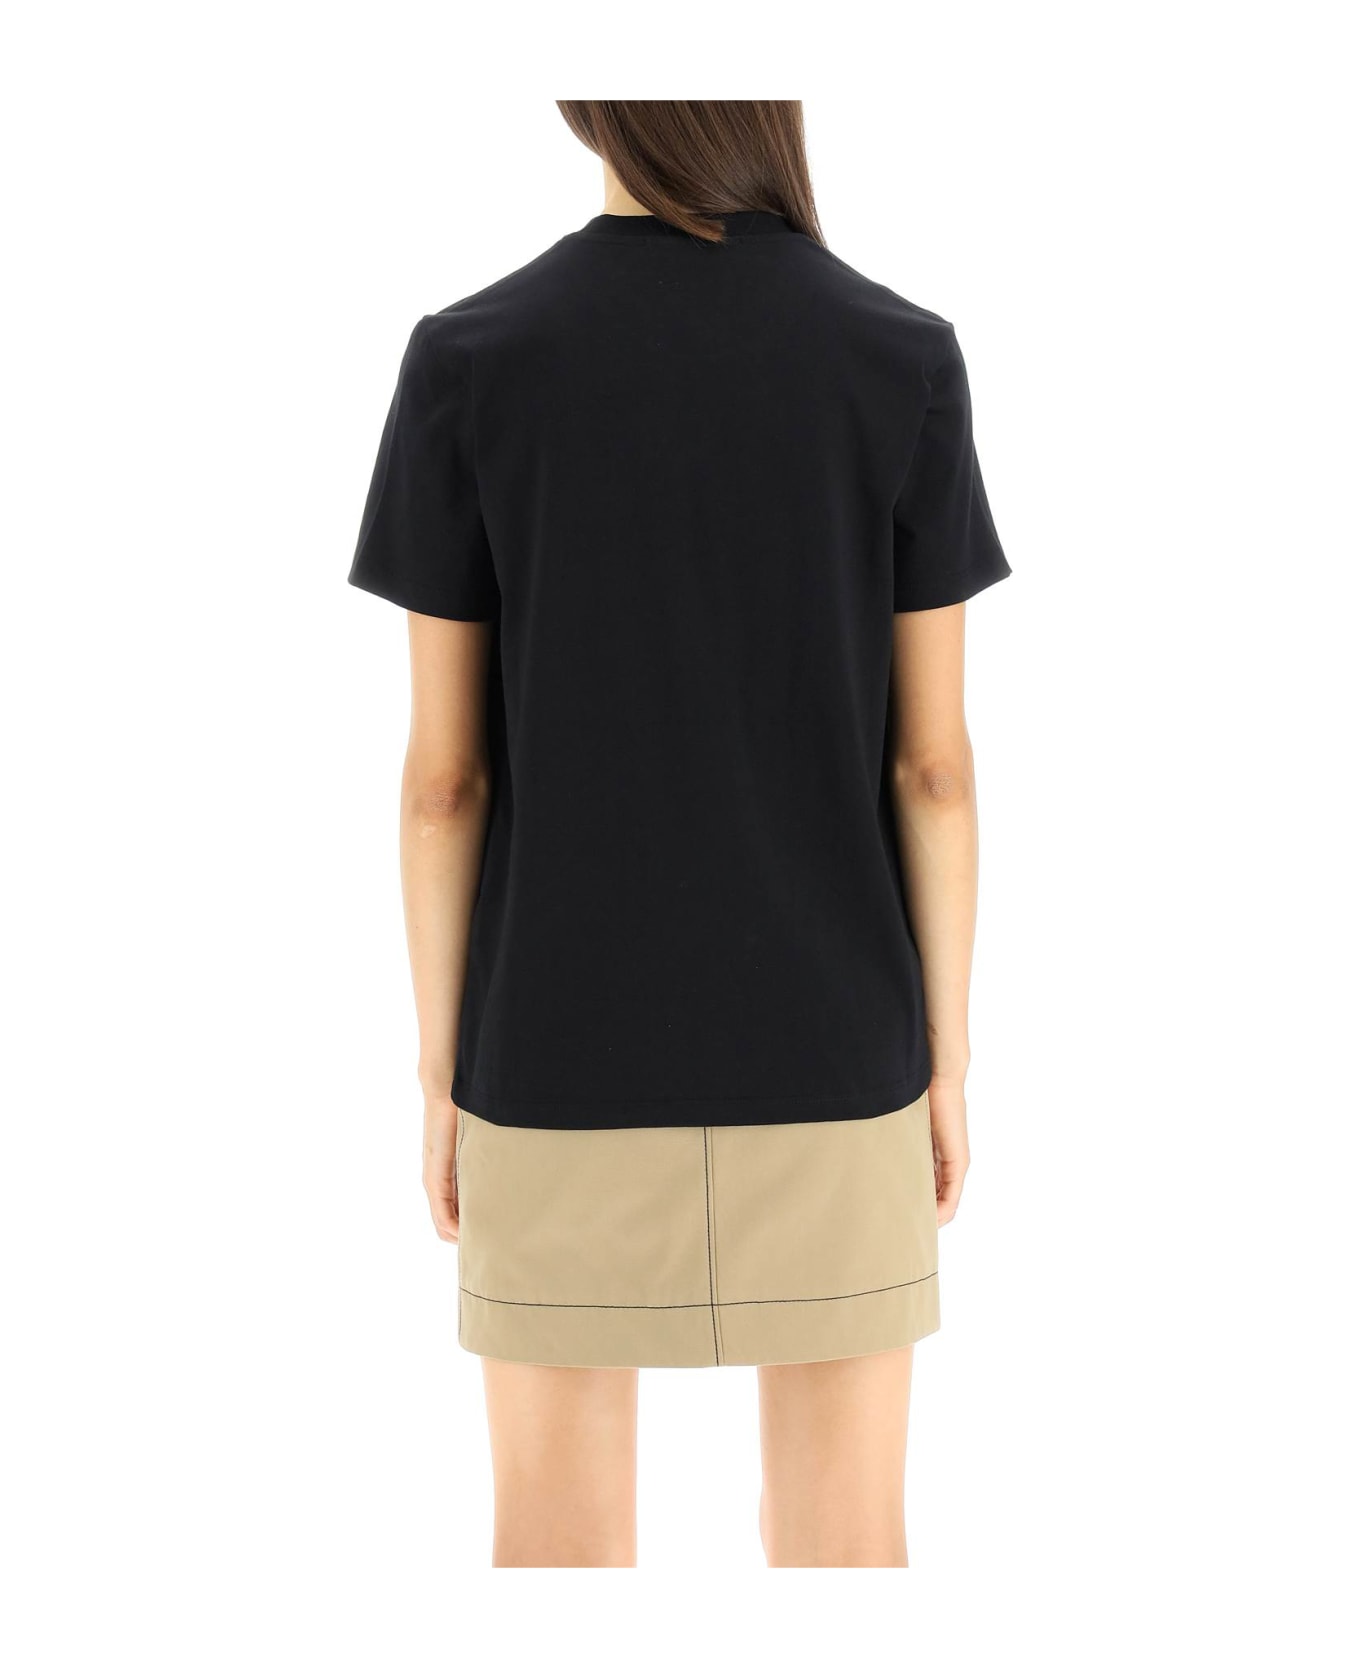 MSGM T-shirt With Brushed Logo - Black Tシャツ